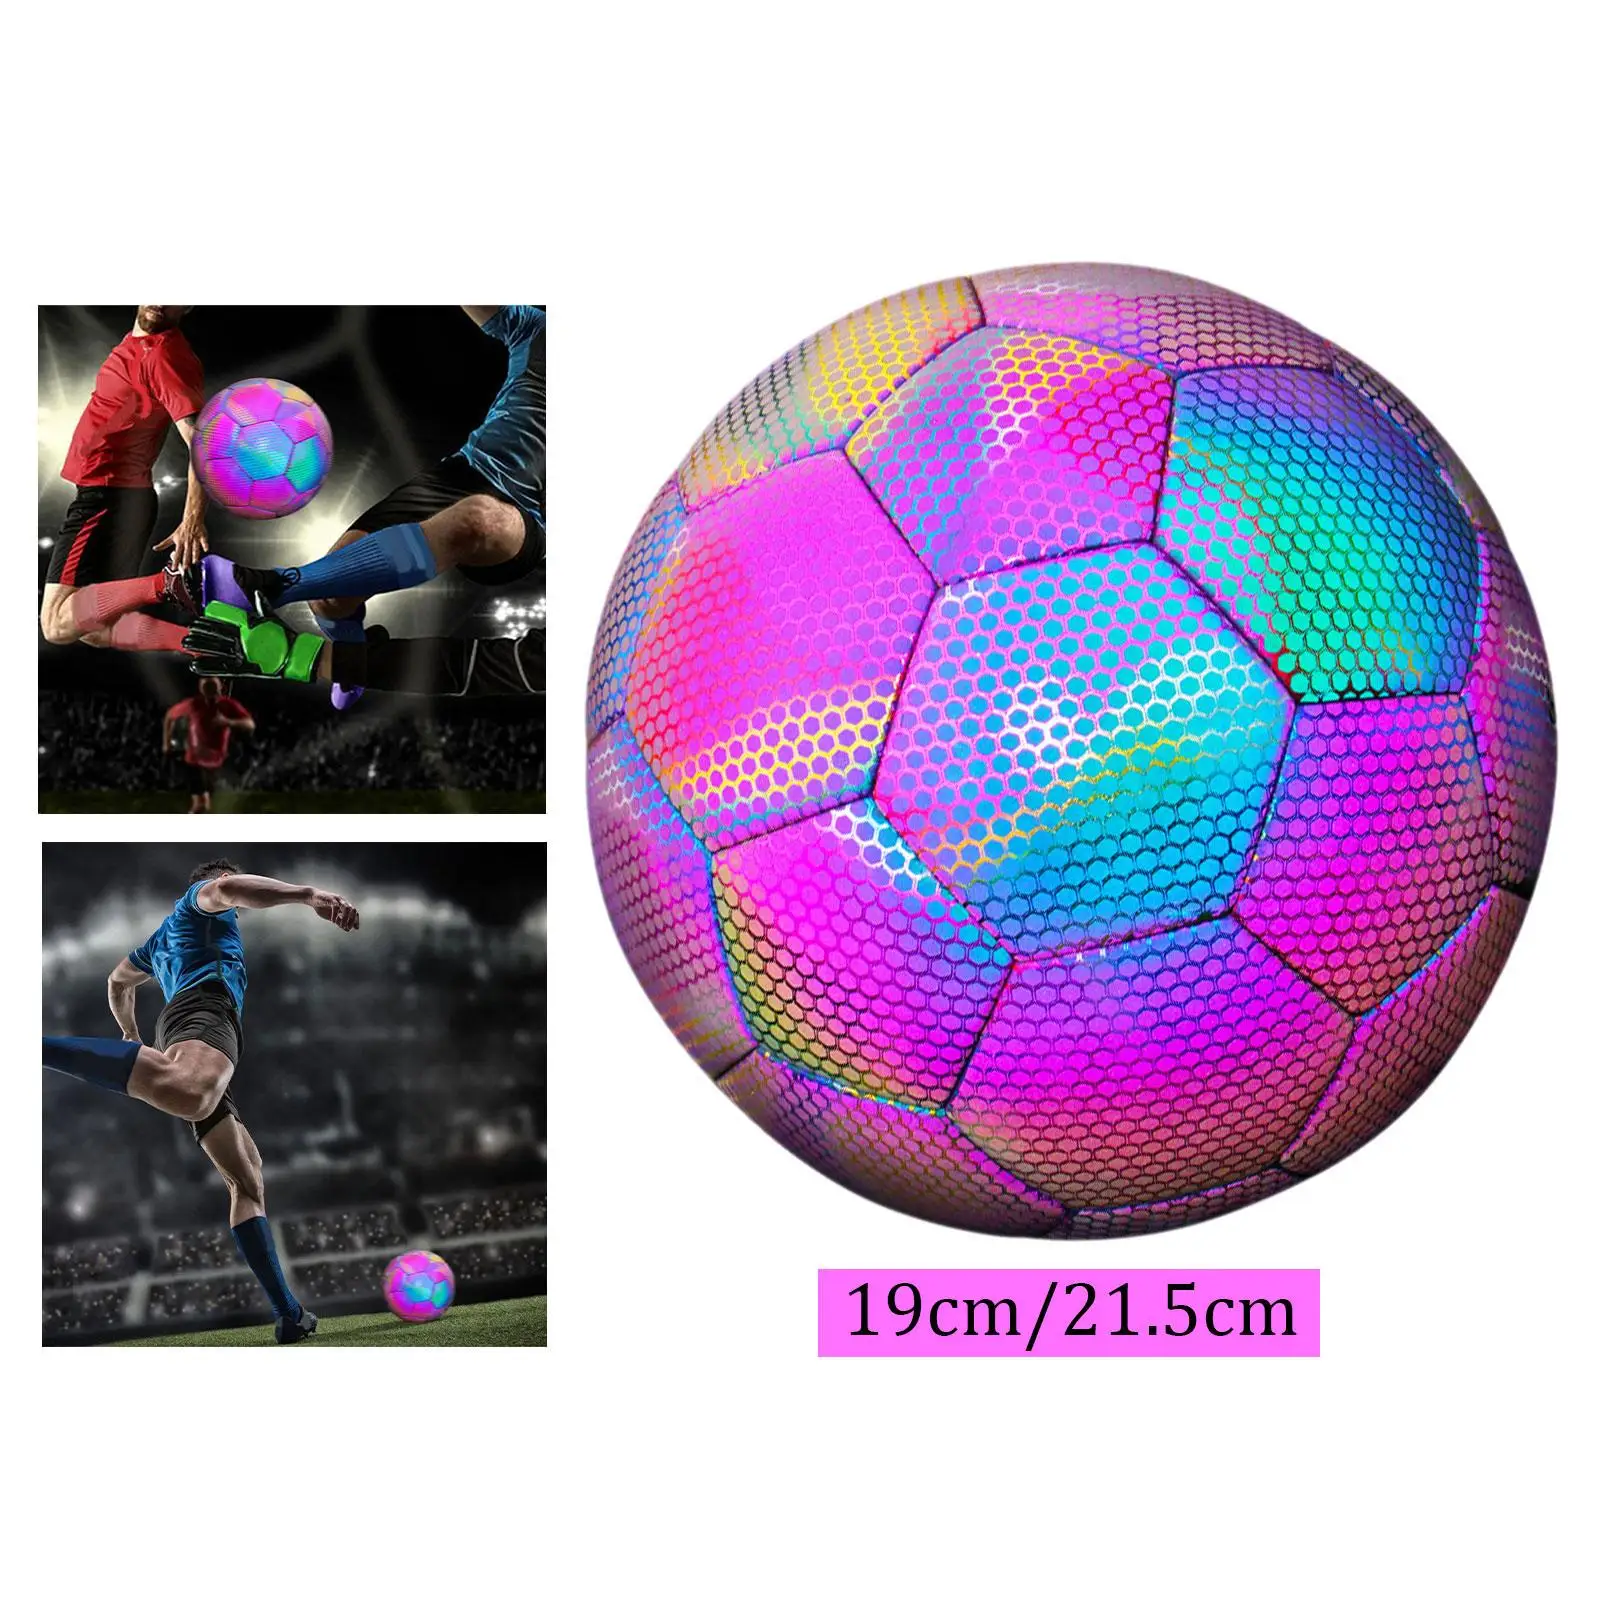 Soccer Ball Reflective Holographic Teens PU Leather Football Outdoors Sports